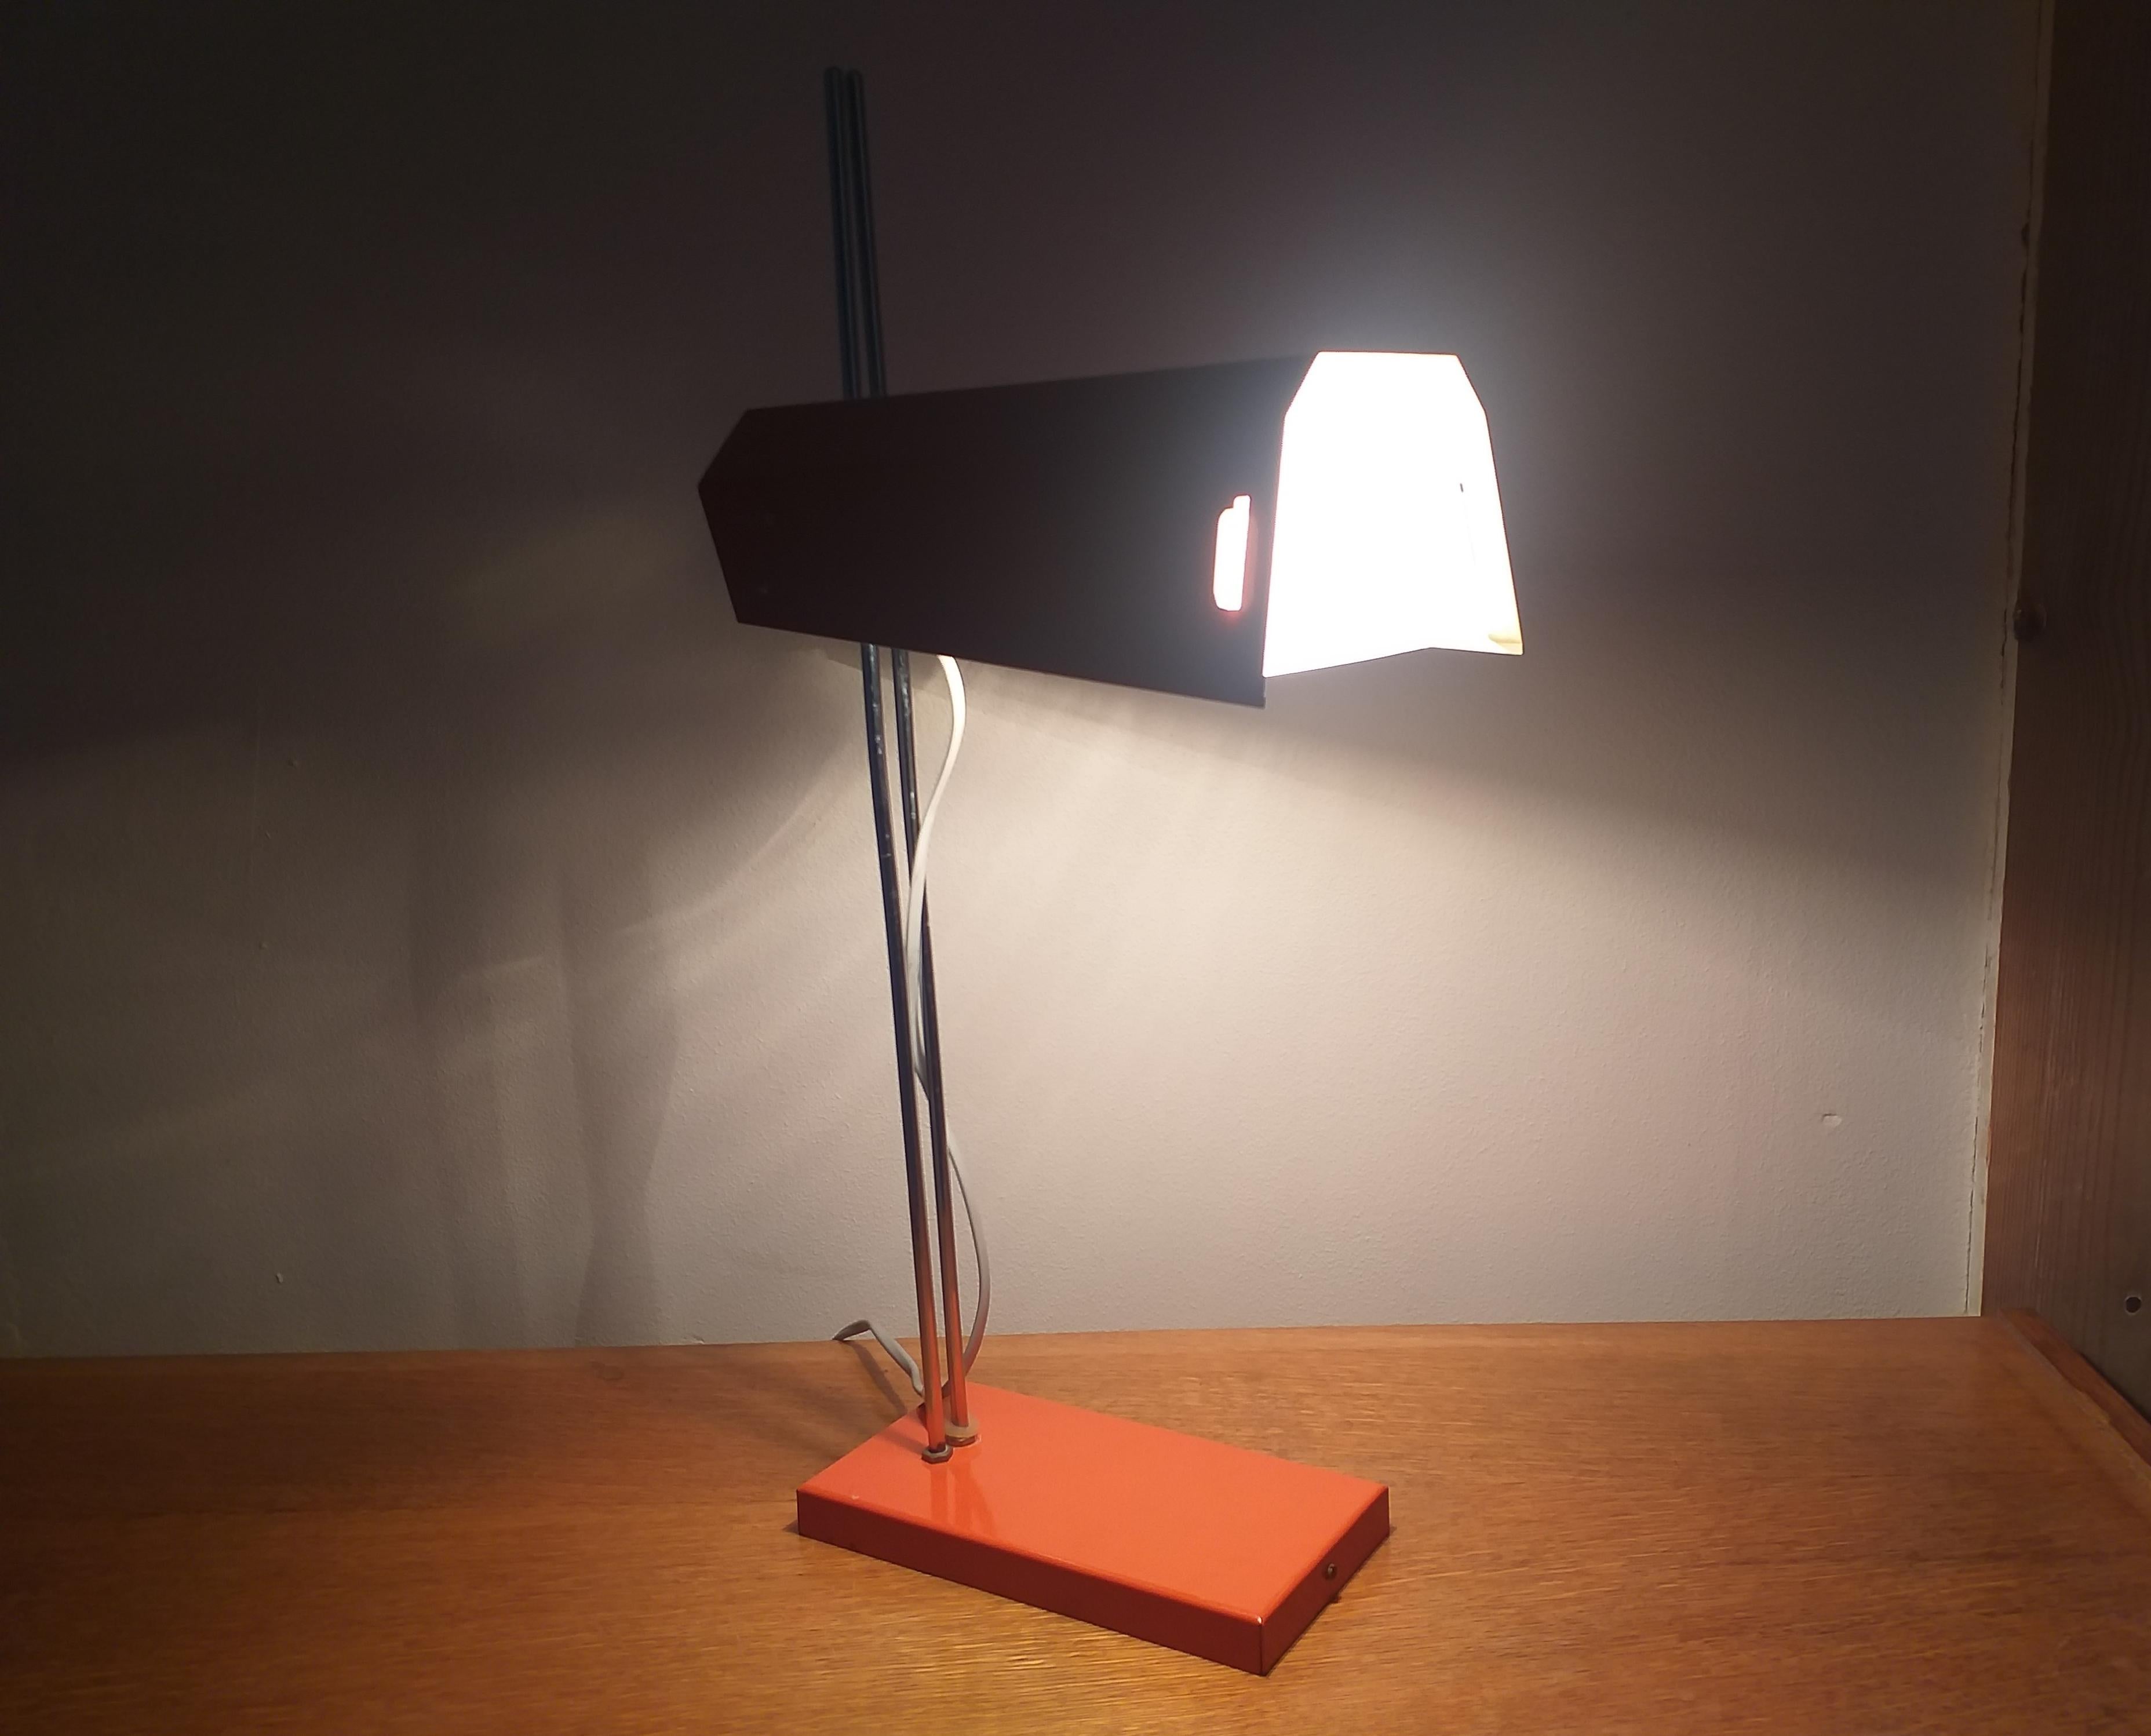 Midcentury Table Lamp Lidokov Designed by Josef Hurka, 1970s For Sale 2